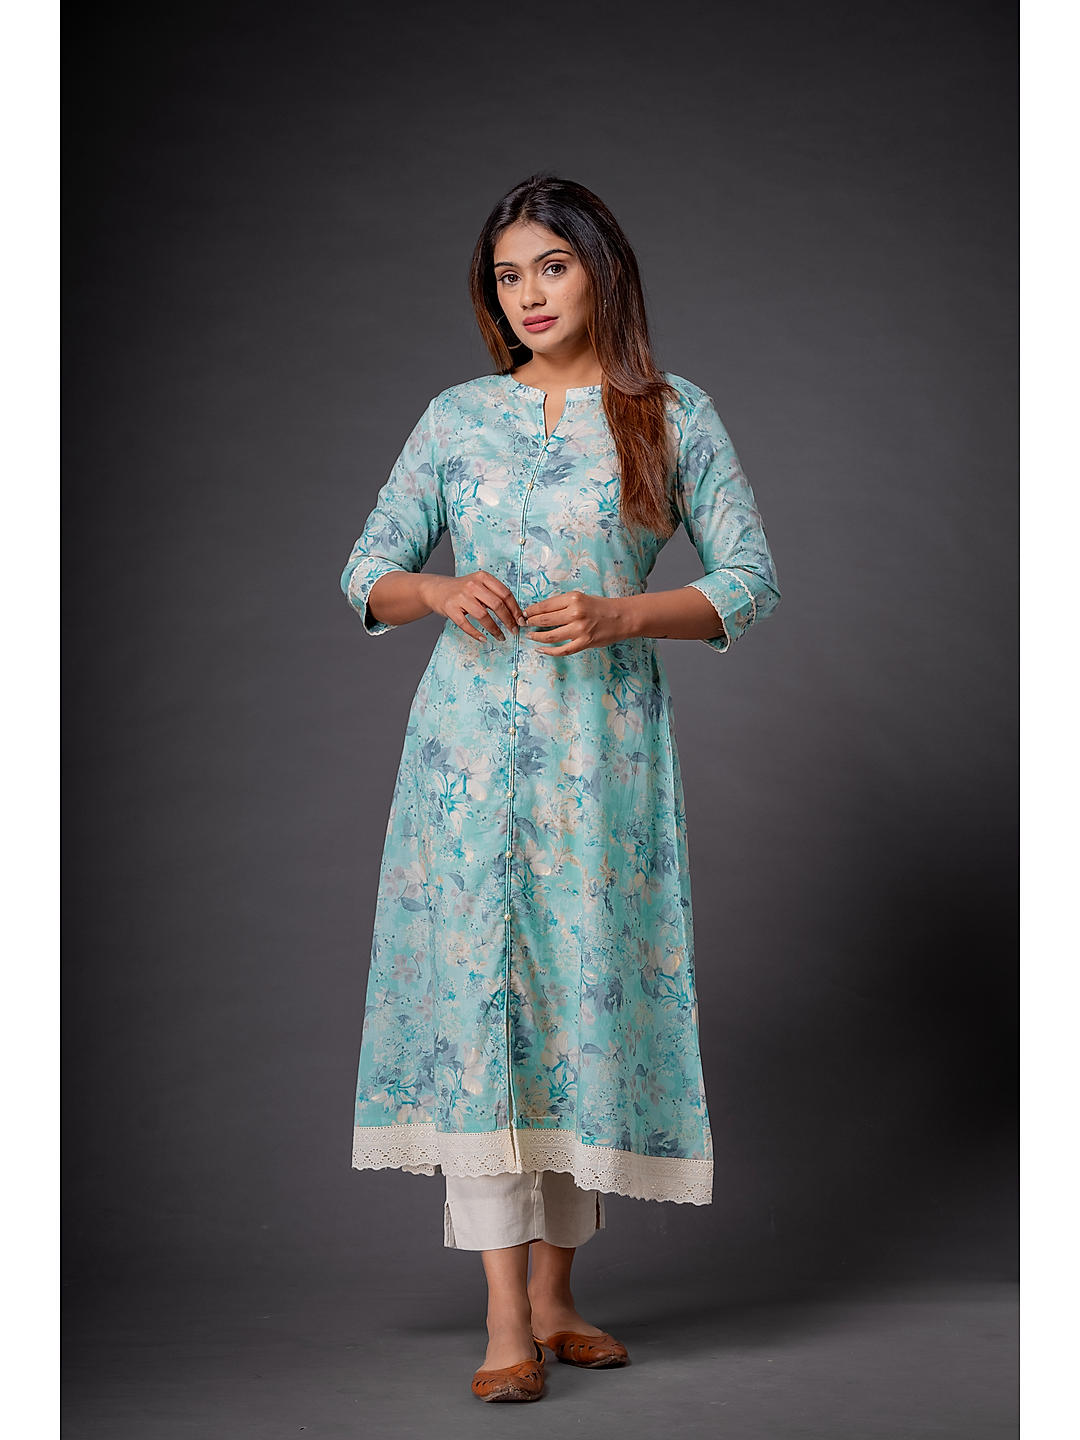 Vismay - Mall Aslam , Perintalmanna - Vanitha ad Kurti - Carrot Orange &  Fern Frond Green Rayon Kurti with Tie & Dye Prints @ ₹ 999 only. Now  available for SALE